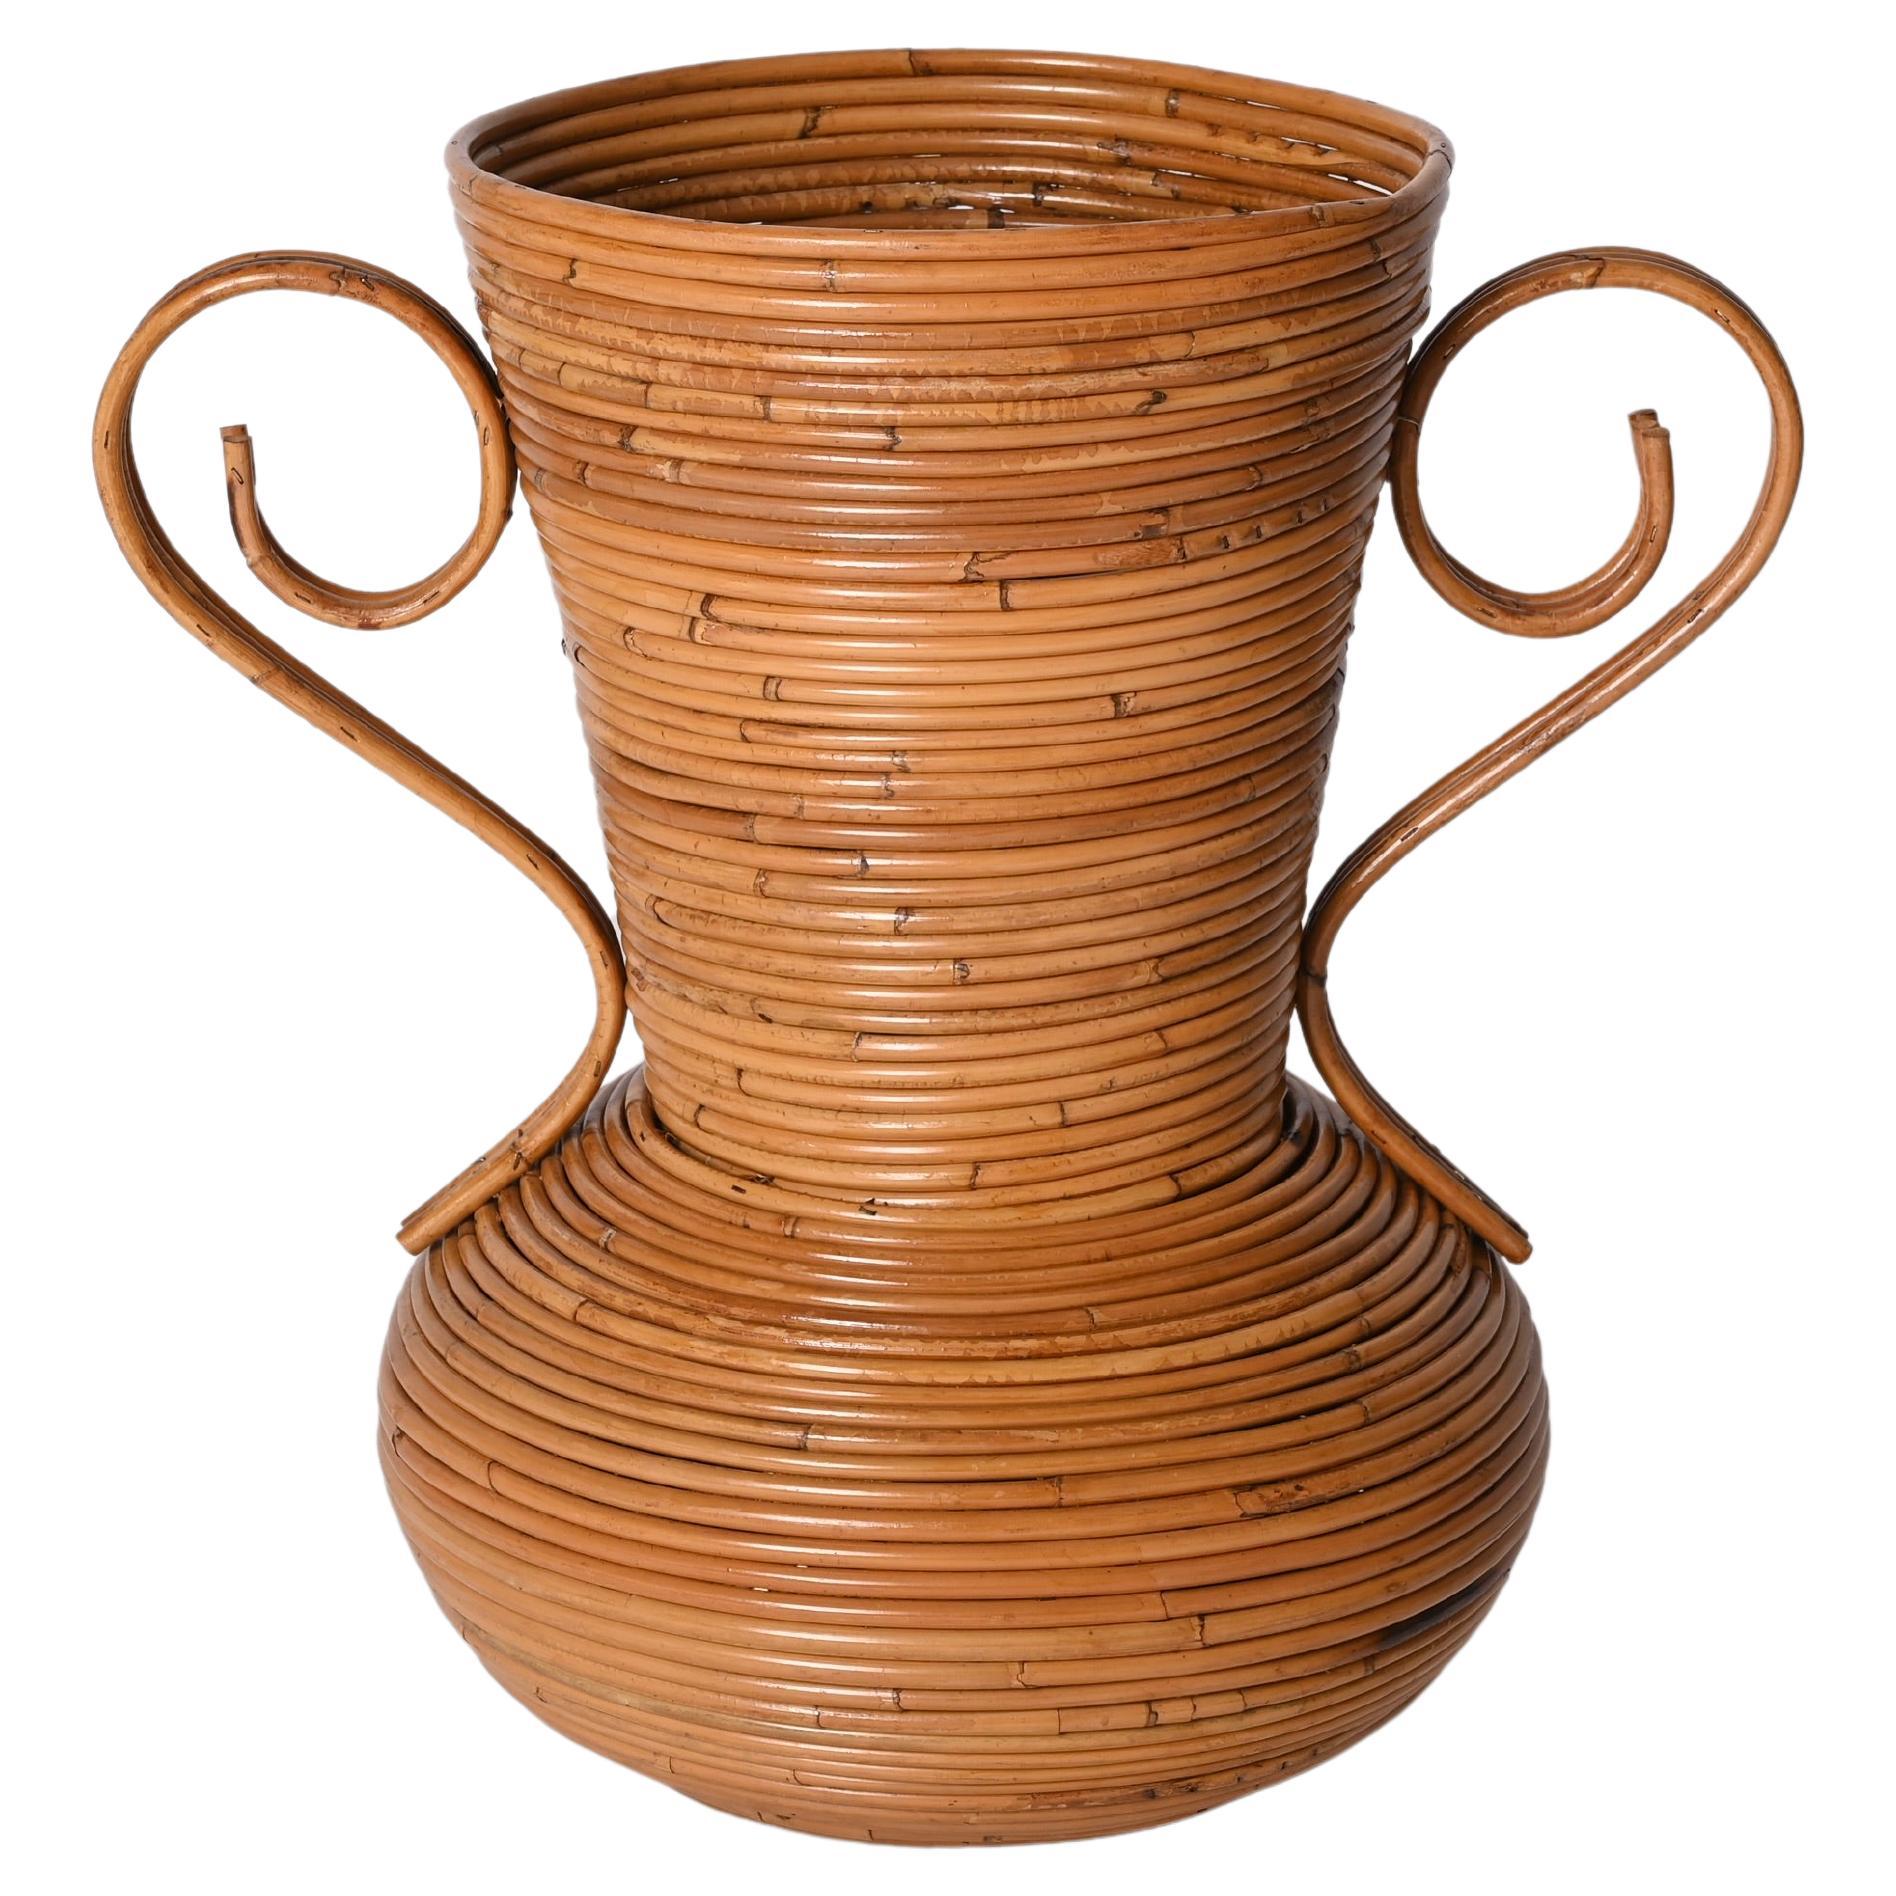 Midcentury Bamboo and Rattan Decorative Vase, by Vivai del Sud, Italy, 1970s For Sale